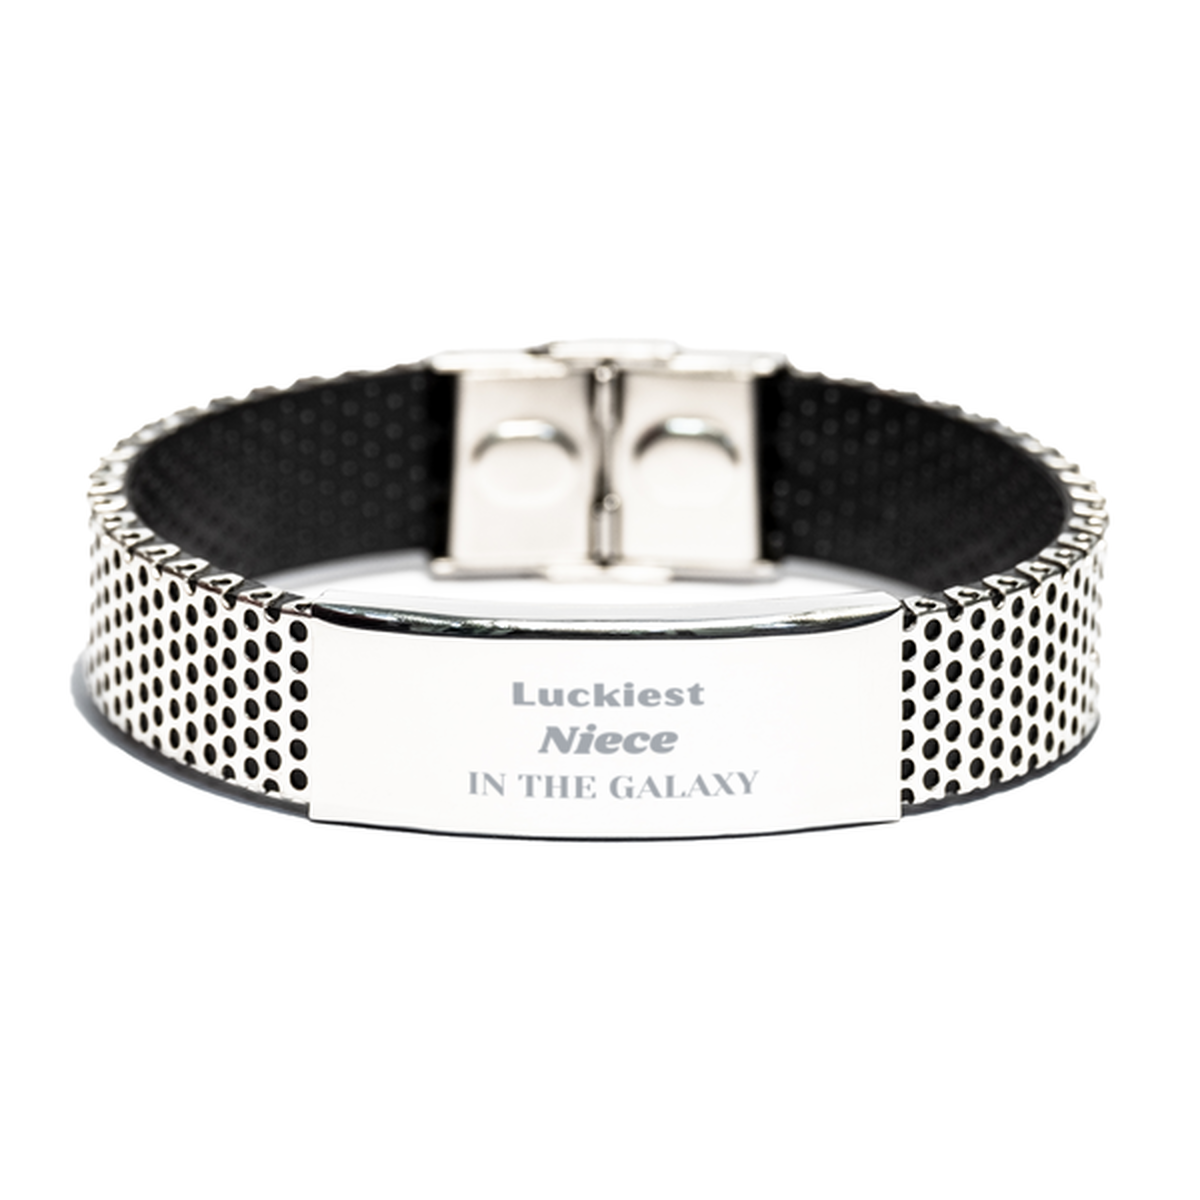 Luckiest Niece in the Galaxy, To My Niece Engraved Gifts, Christmas Niece Stainless Steel Bracelet Gifts, X-mas Birthday Unique Gifts For Niece Men Women